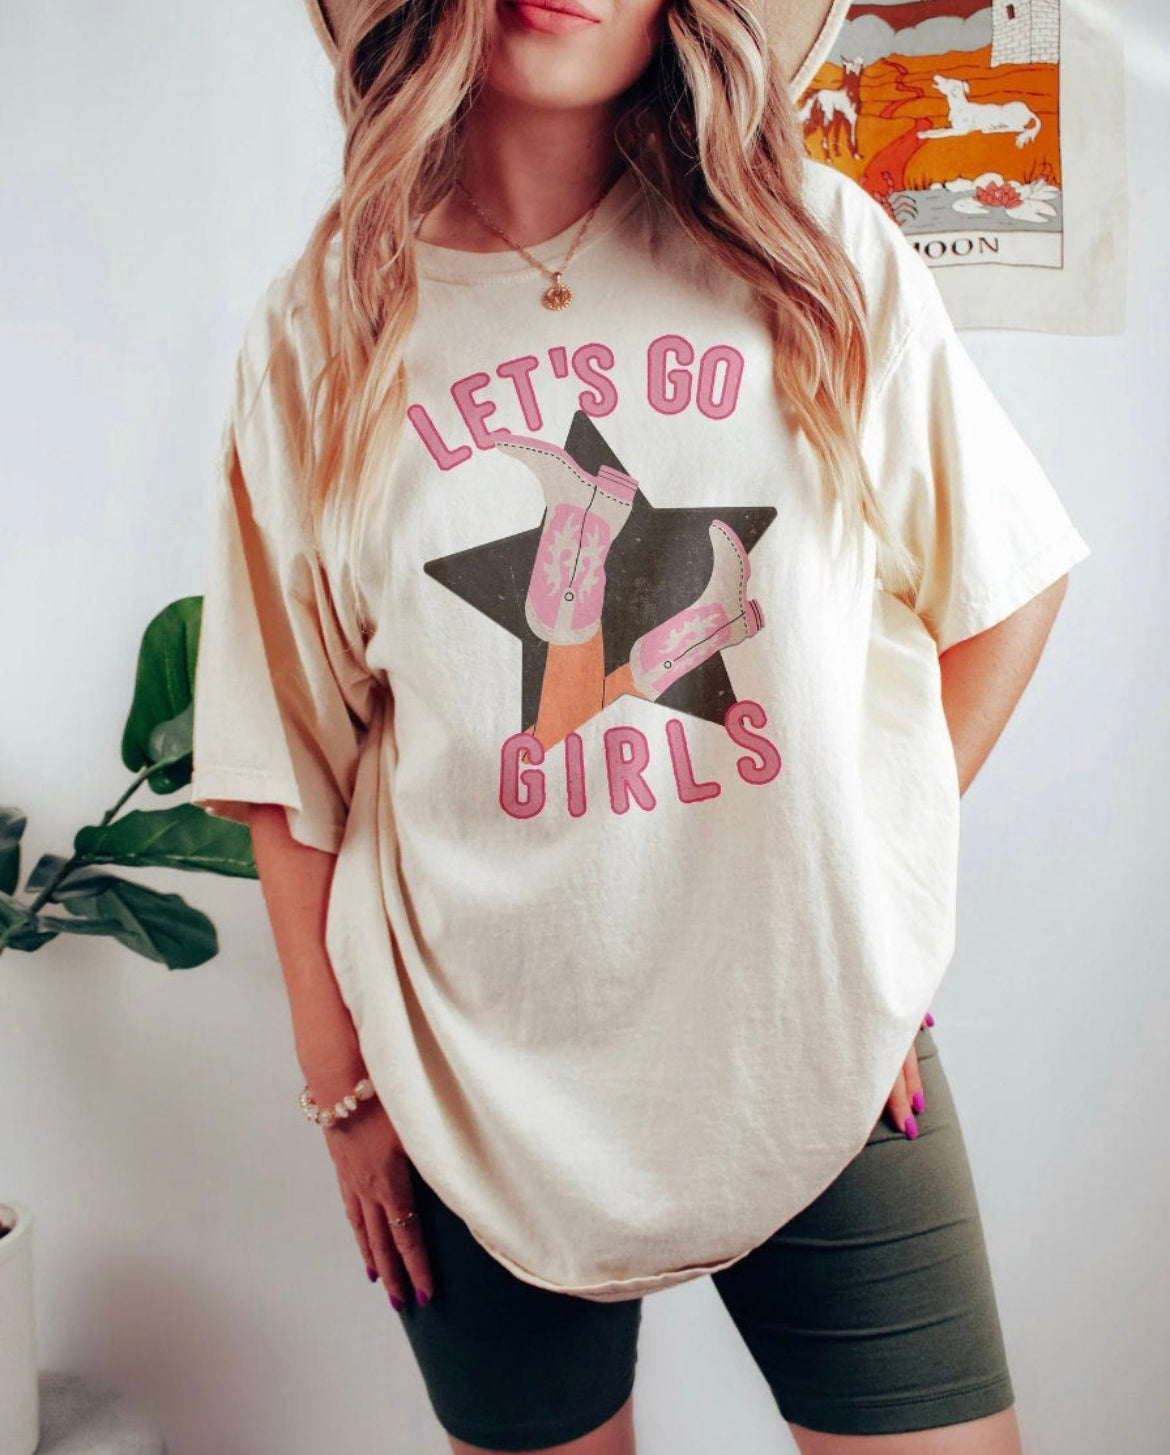 Let’s Go Girls tee preorder